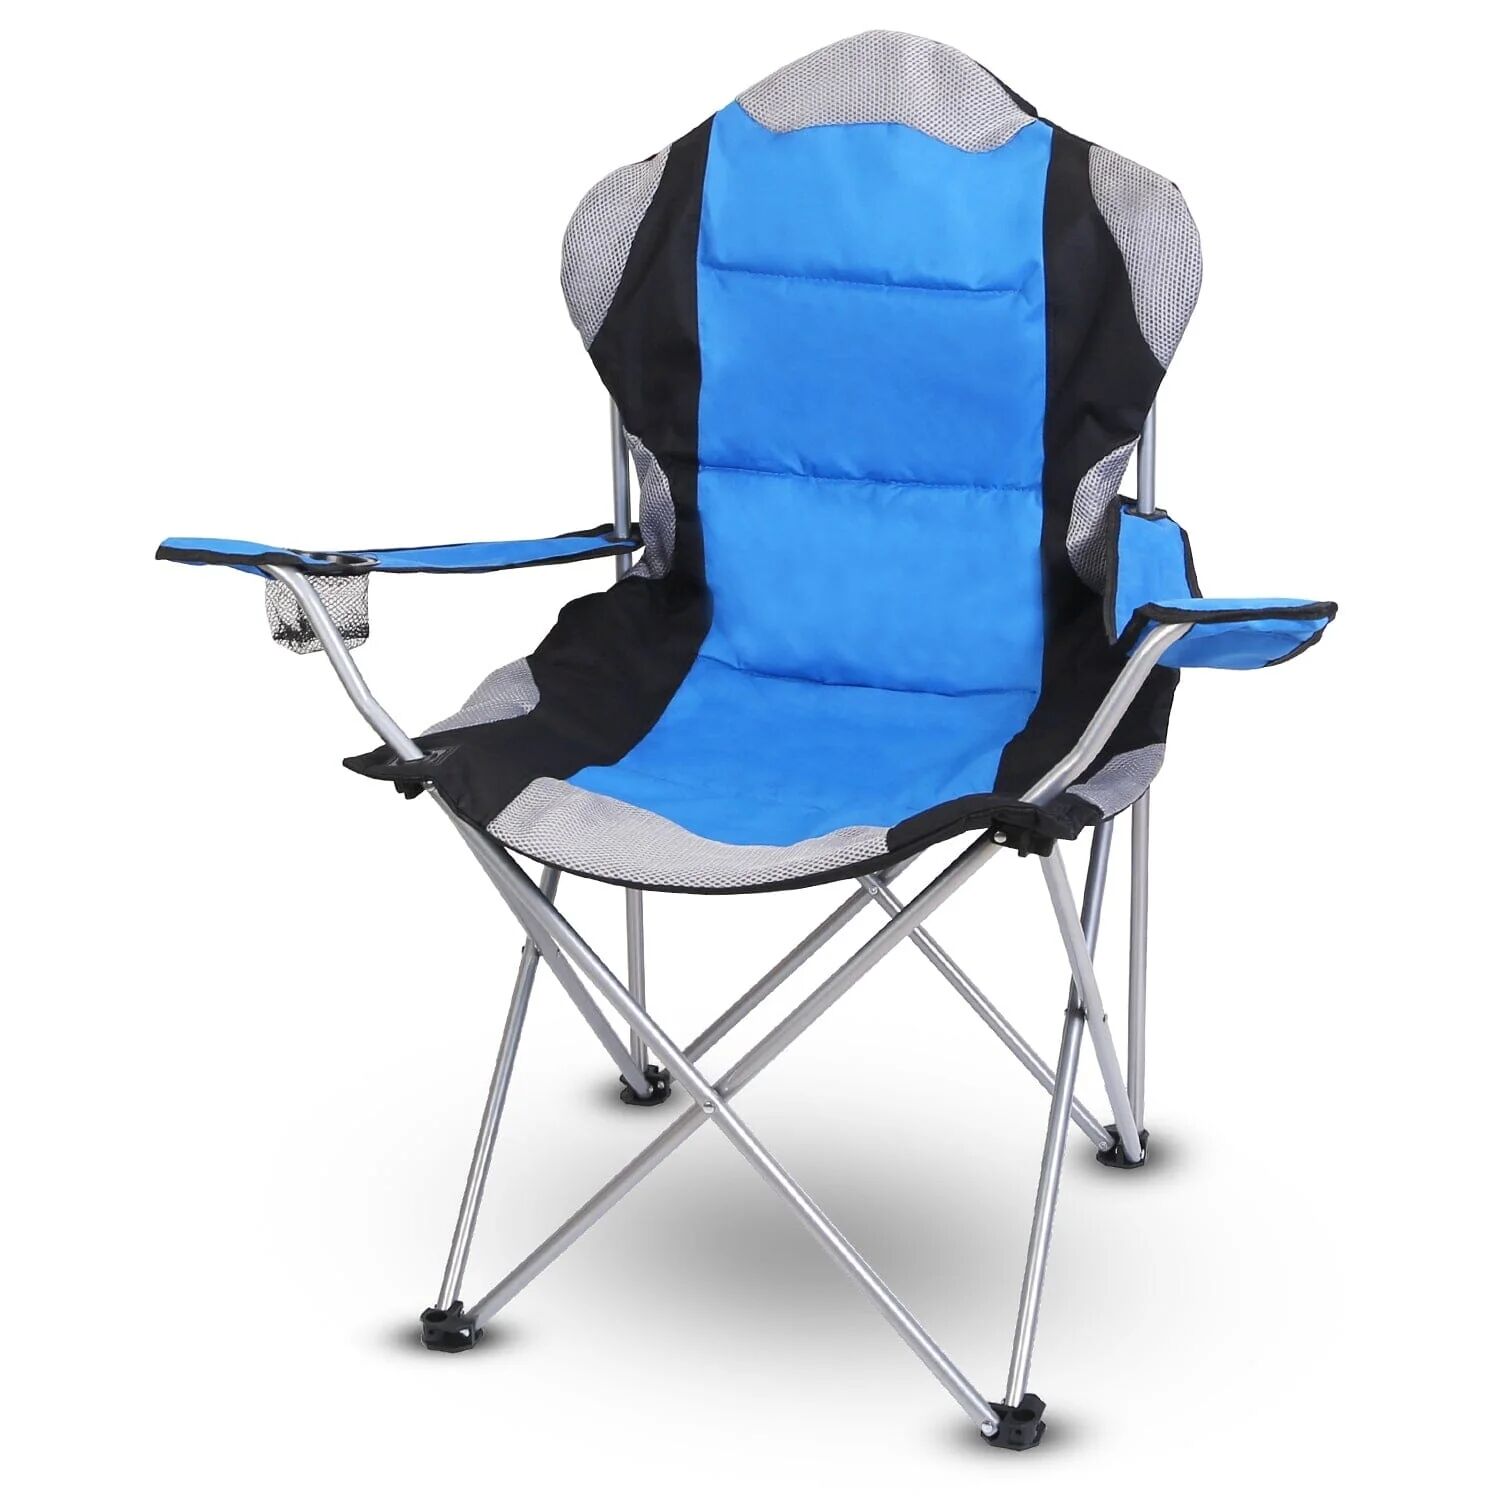 DailySale Padded Seat Arm Back Foldable Camping Chair Heavy Duty Steel Lawn